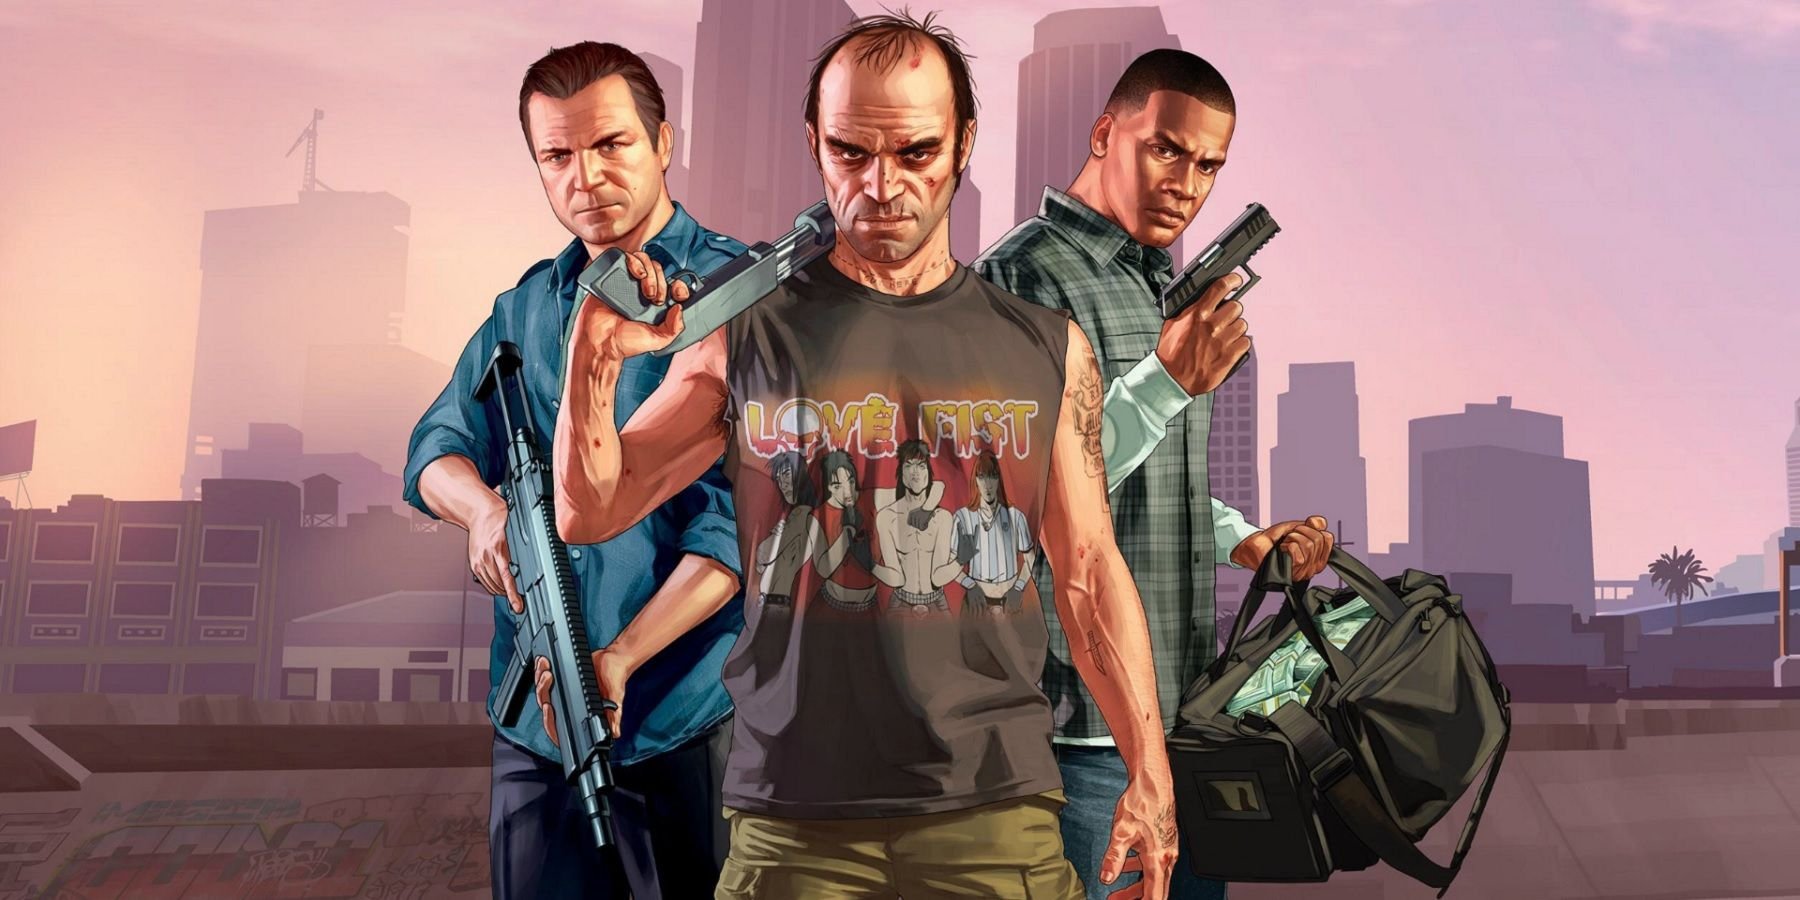 Some Grand Theft Auto Fans Think They've Spotted A GTA 6 Tease in the New Trailer